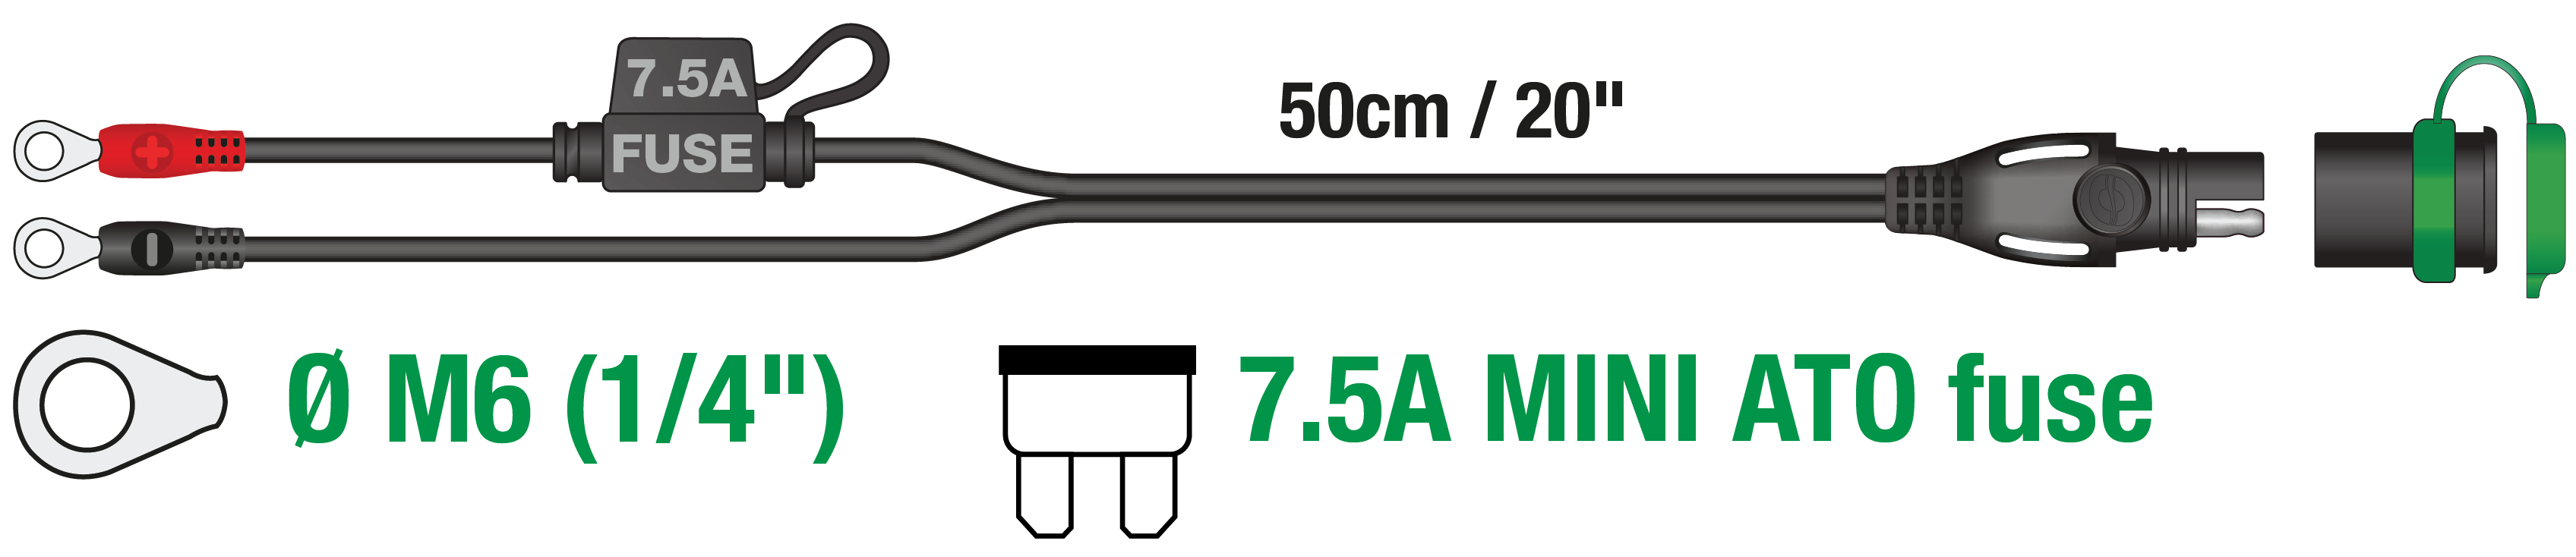 ringlets that perfectly fit to lithium power sport battery terminals with 7.5A fuse that protects the -40° rated cable and electronics